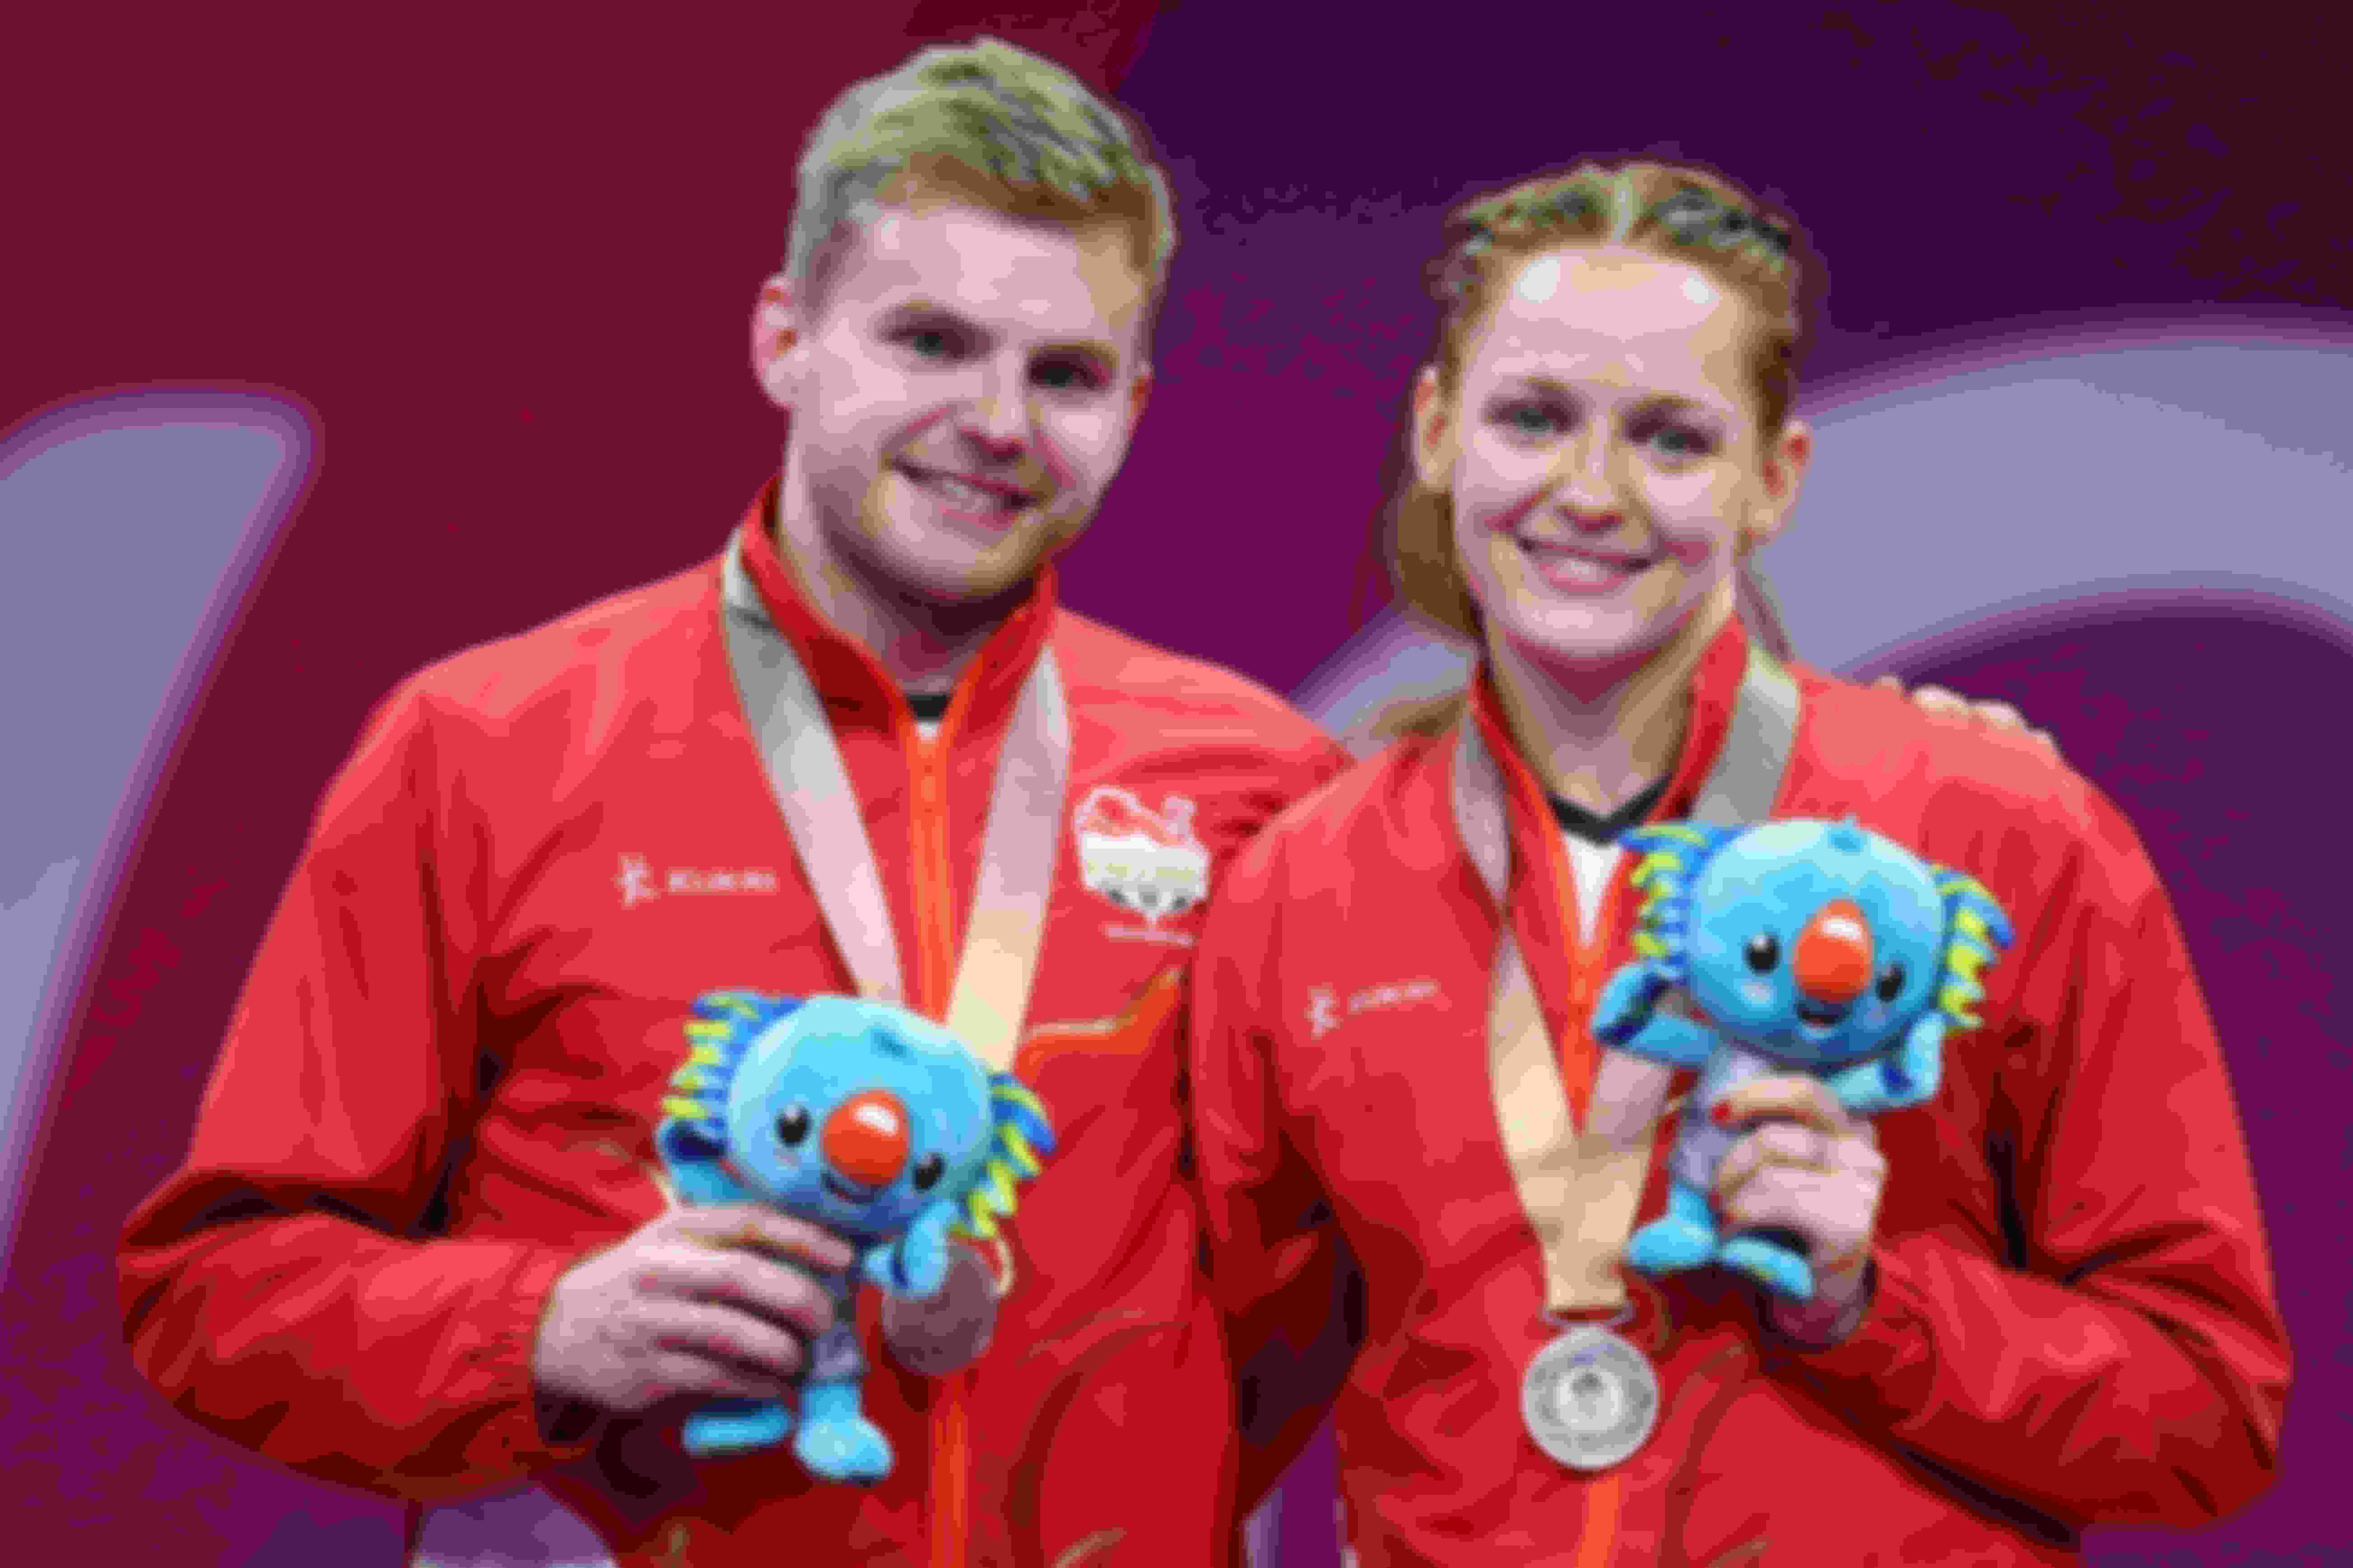 Great Britain's Marcus Ellis and Lauren Smith win badminton silver at the 2018 Commonwealth Games 